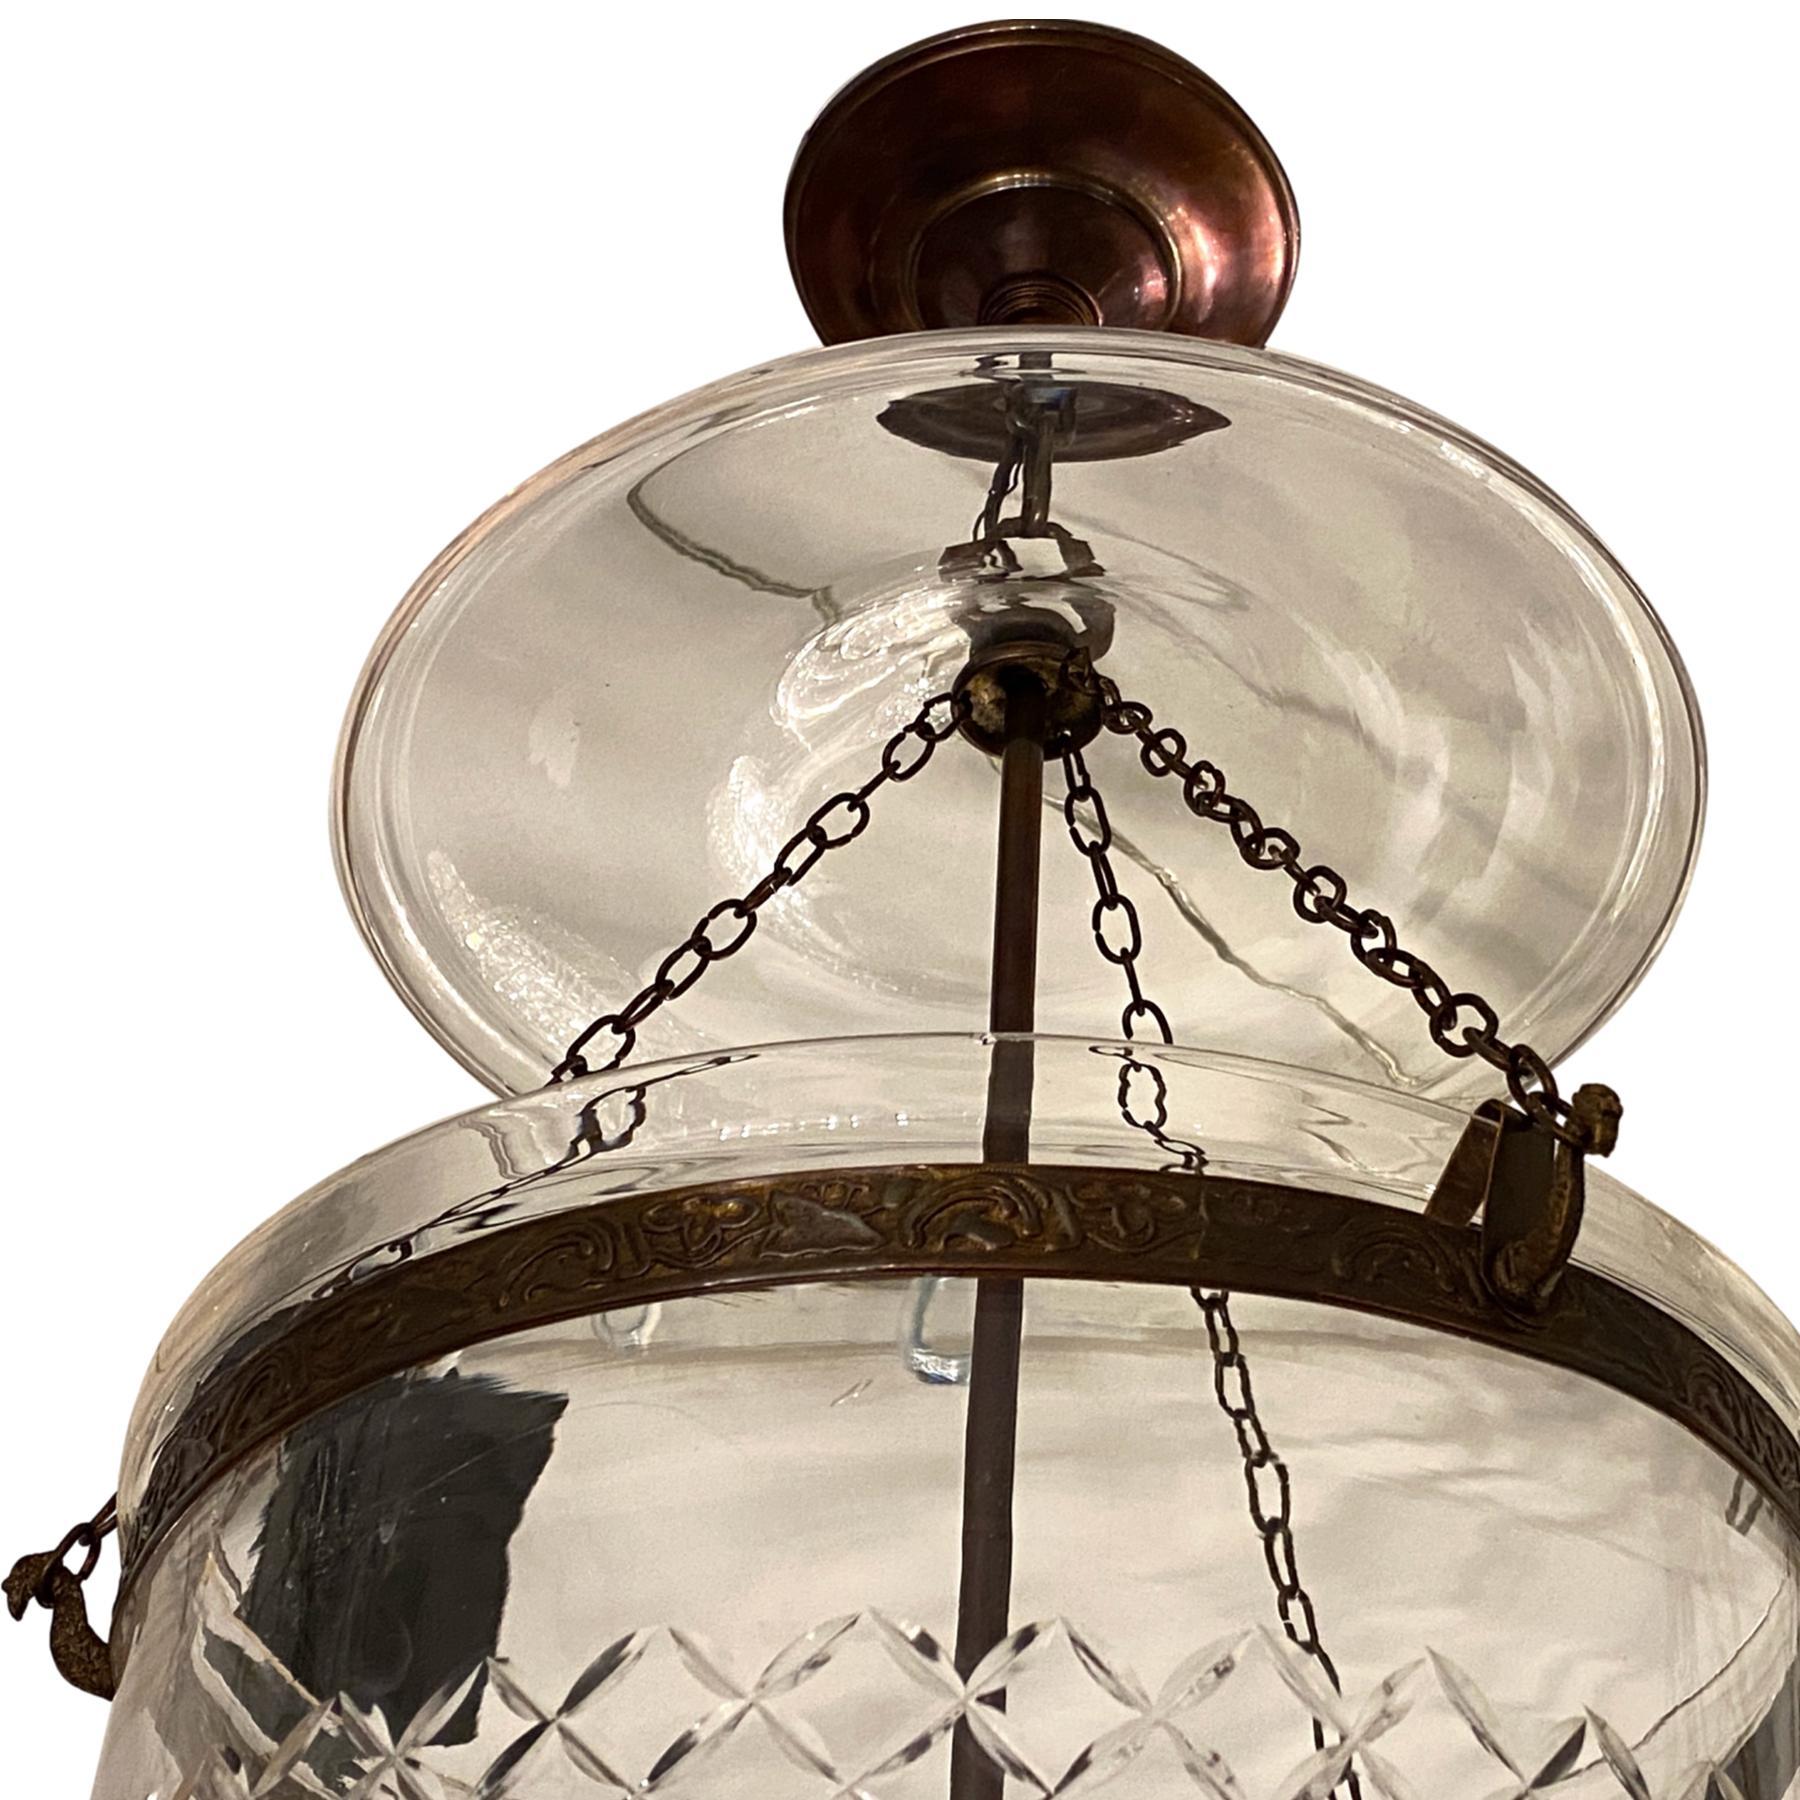 A pair of circa 1940's English etched glass lanterns with original smoke bell and bronze hardware. Sold individually.

Measurements:
Current drop: 31